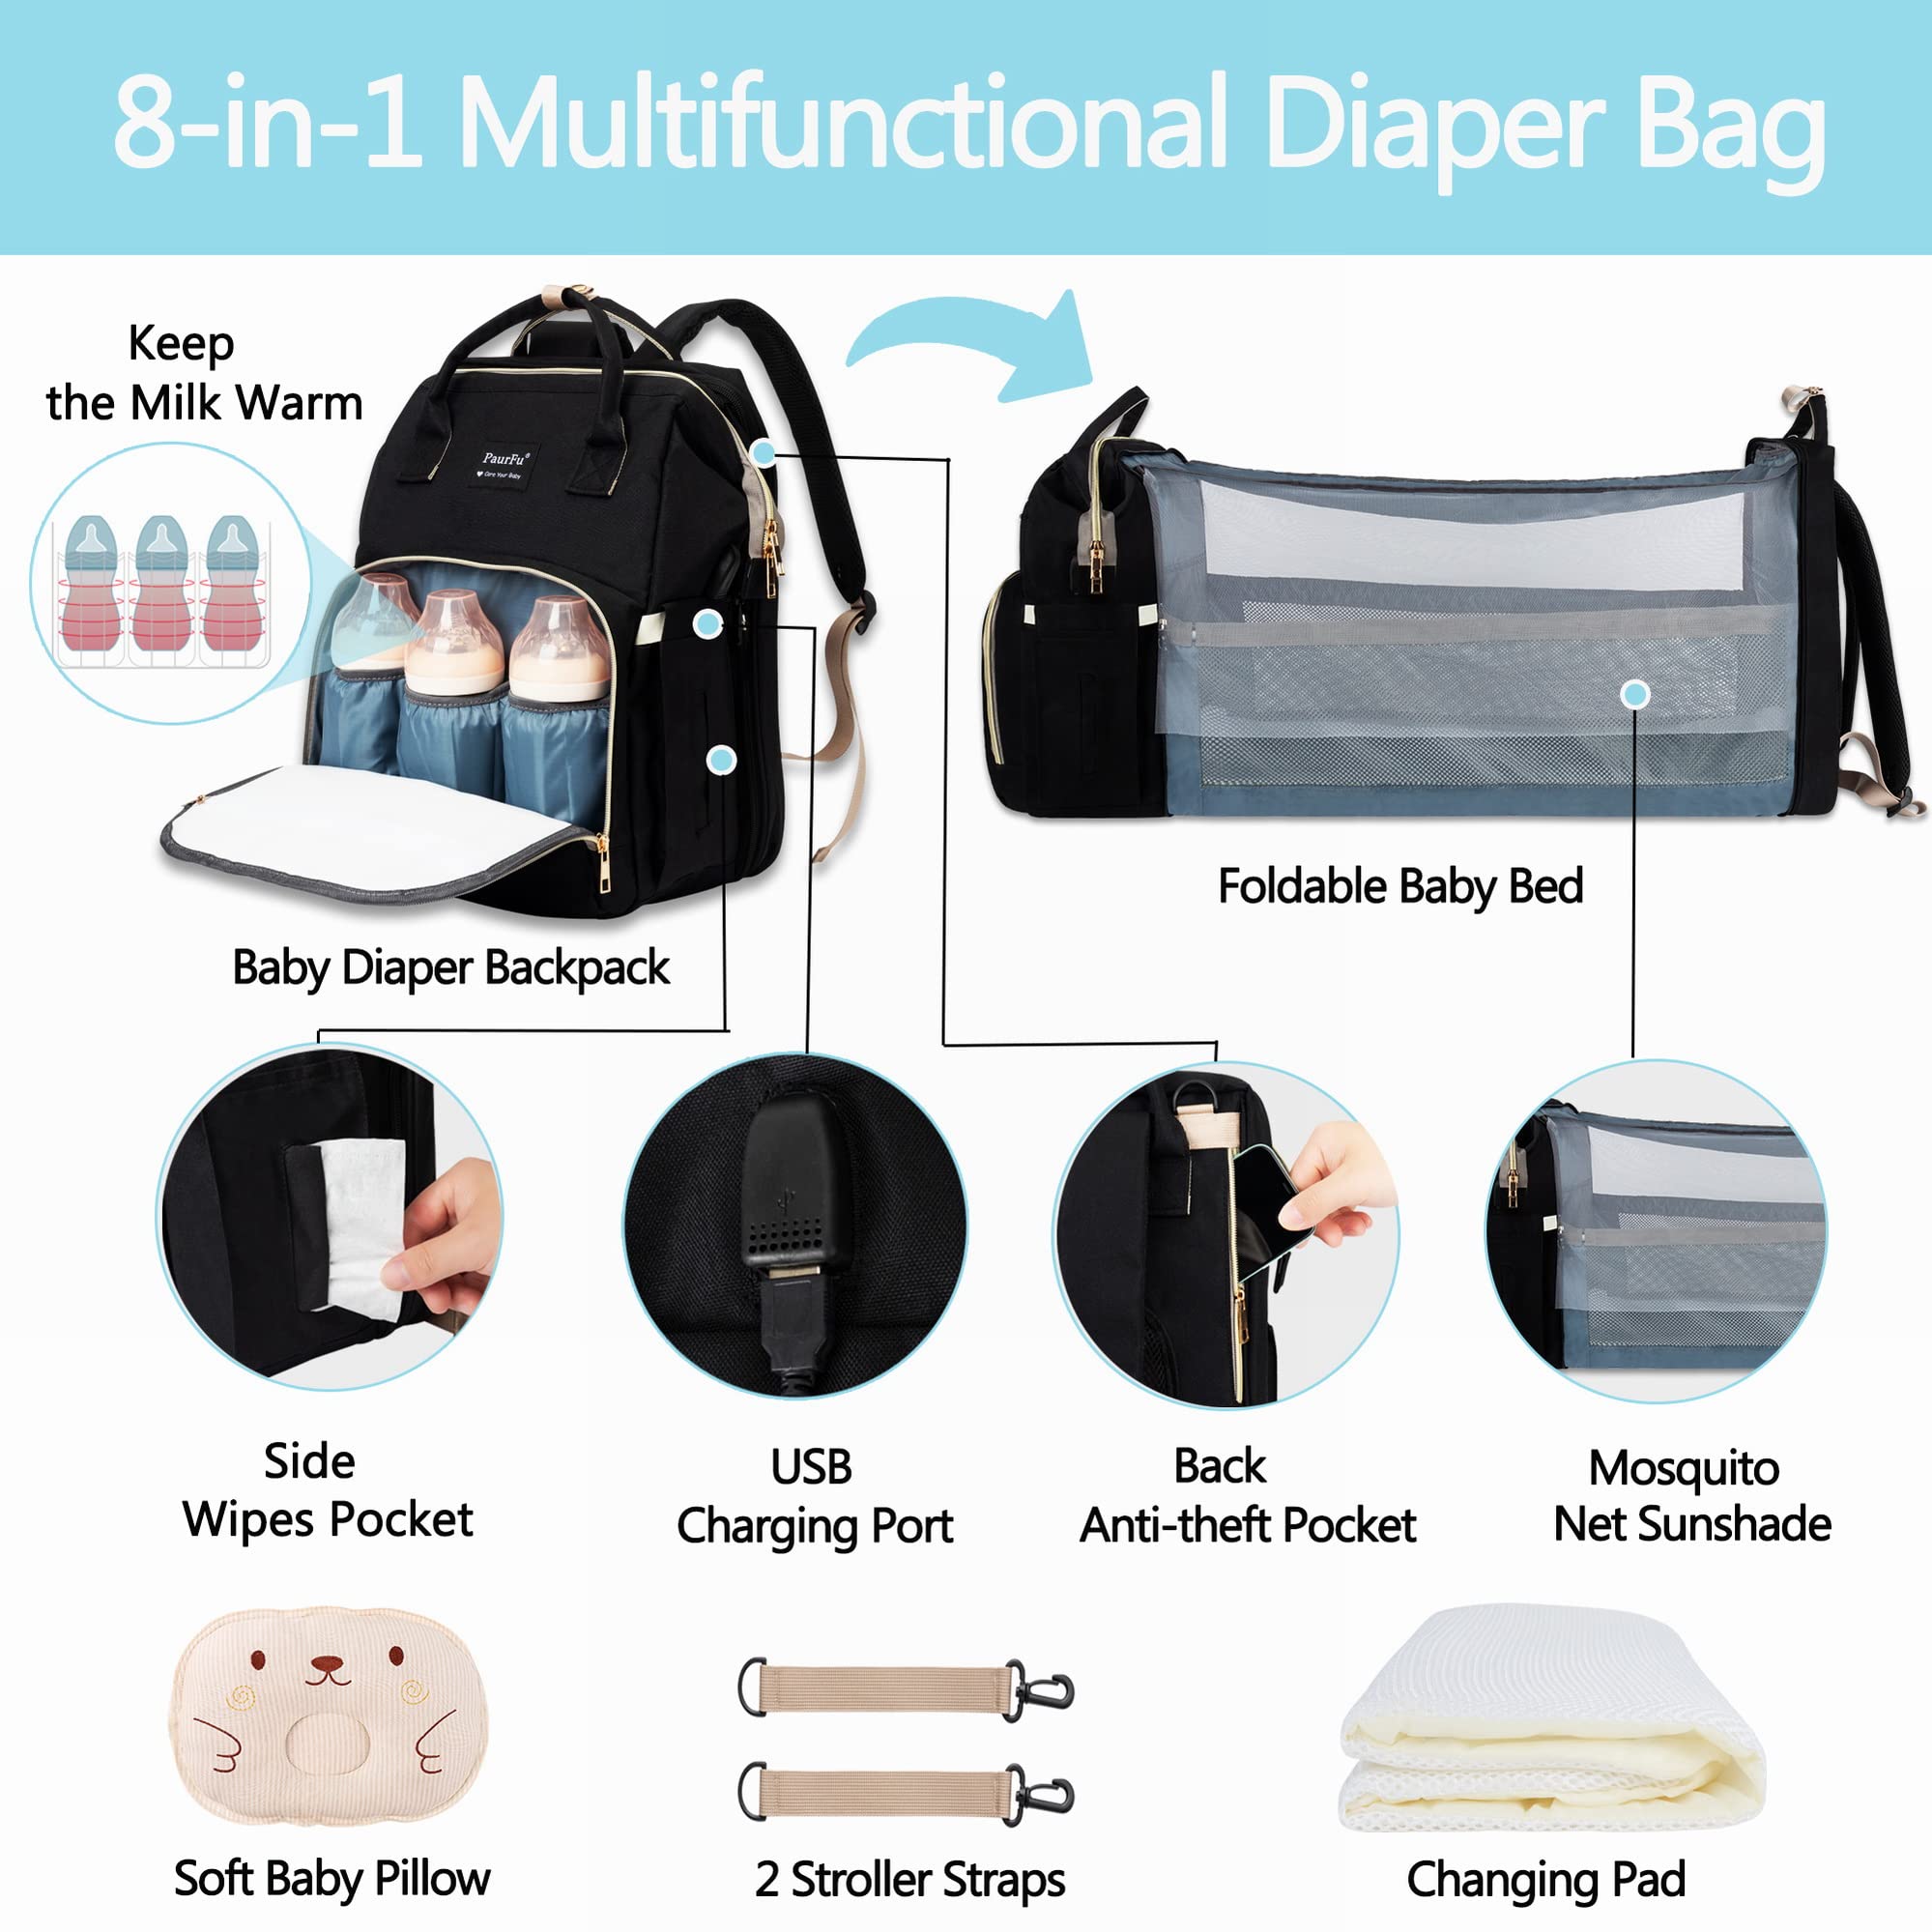 PaurFu Updated 8-in-1 Diaper Bag Backpack, Multifunctional Diaper Baby Bag for Mom Dad with Bassinet Bed,Changing Station,Soft Baby Pillow,Mosquito Net Sunshade and USB Charge Port etc.